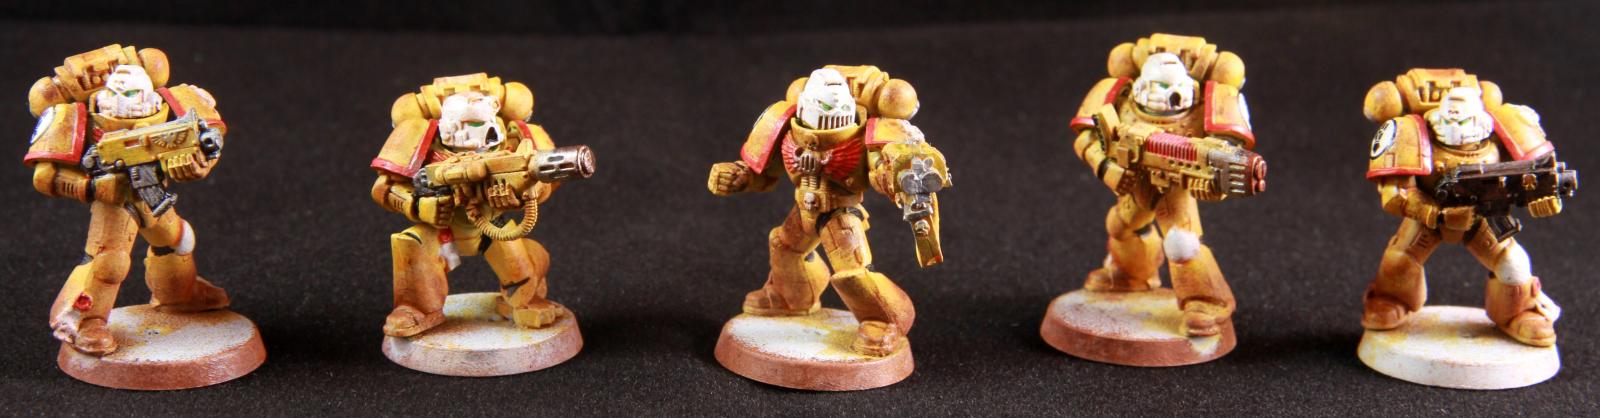 Imperial fist vets